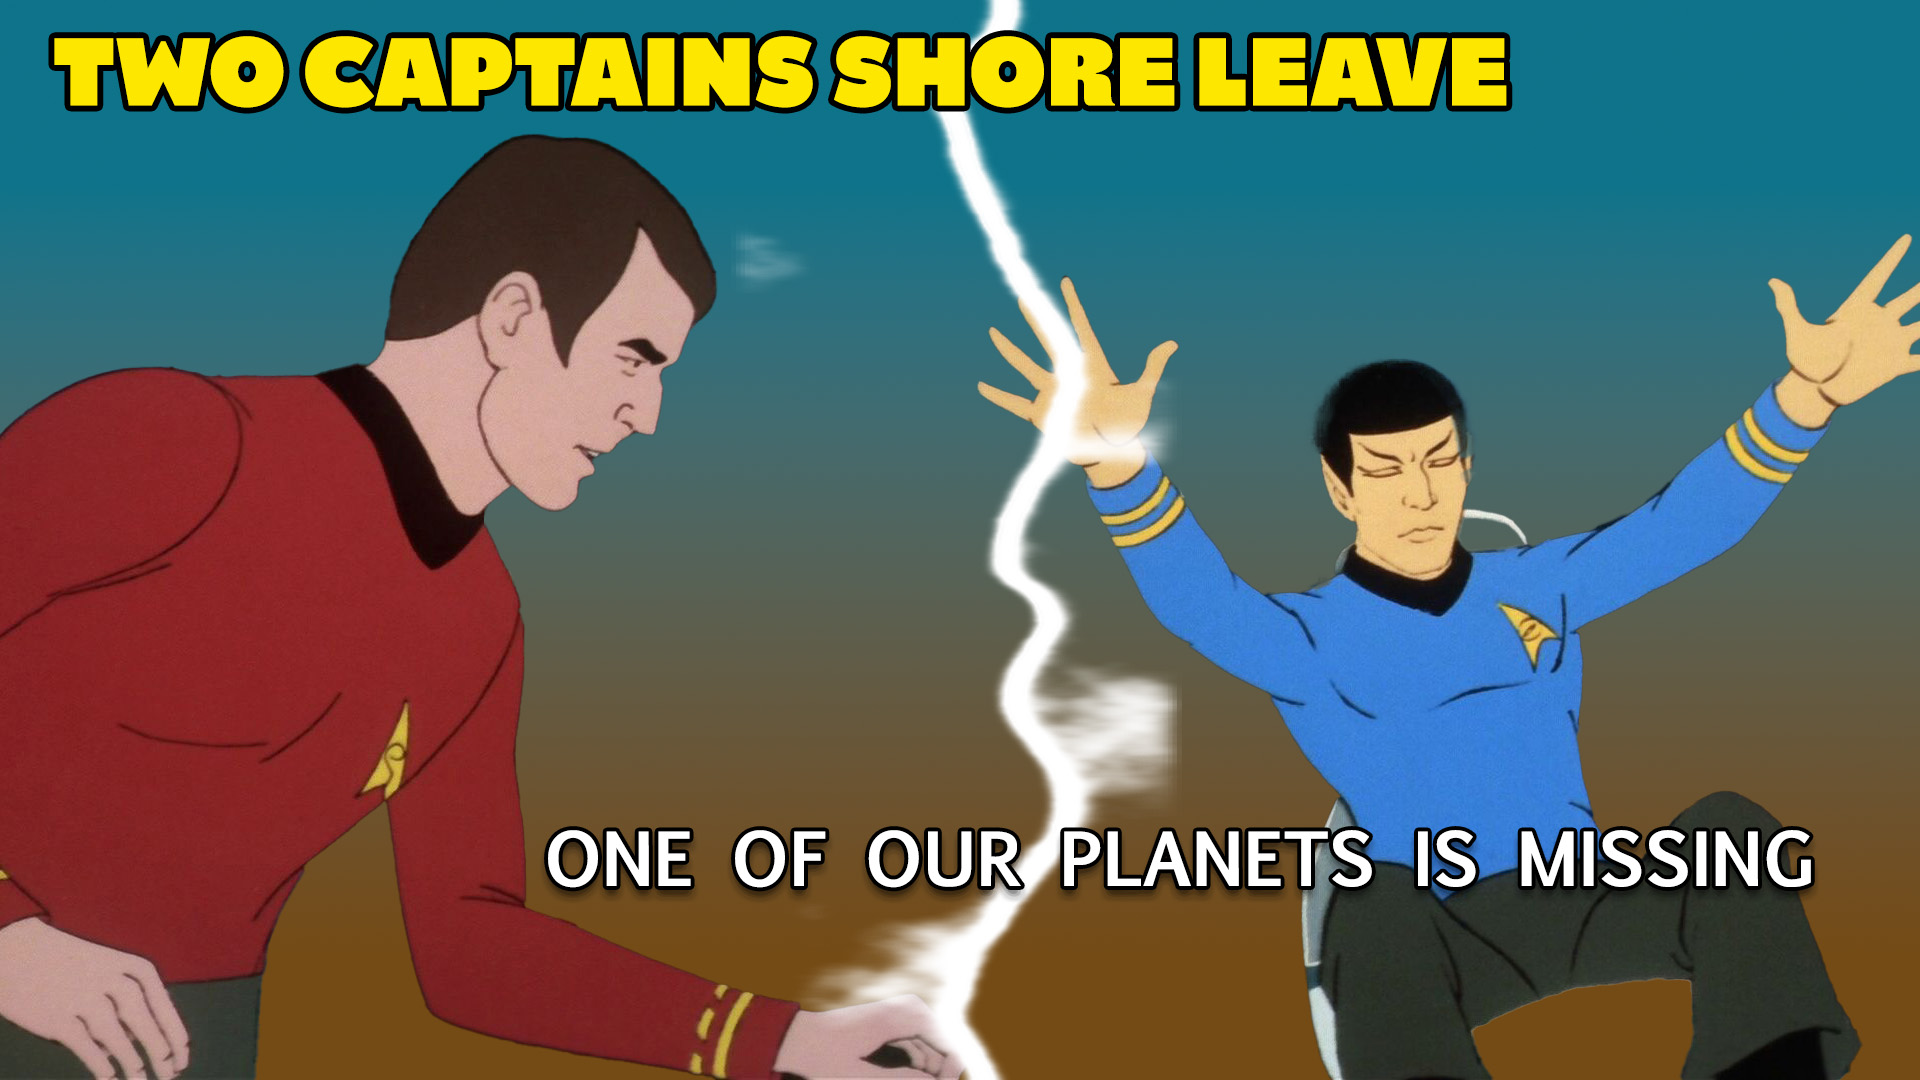 Two Captains Shore Leave: Star Trek: The Animated Series – “One of Our Planets is Missing” Review